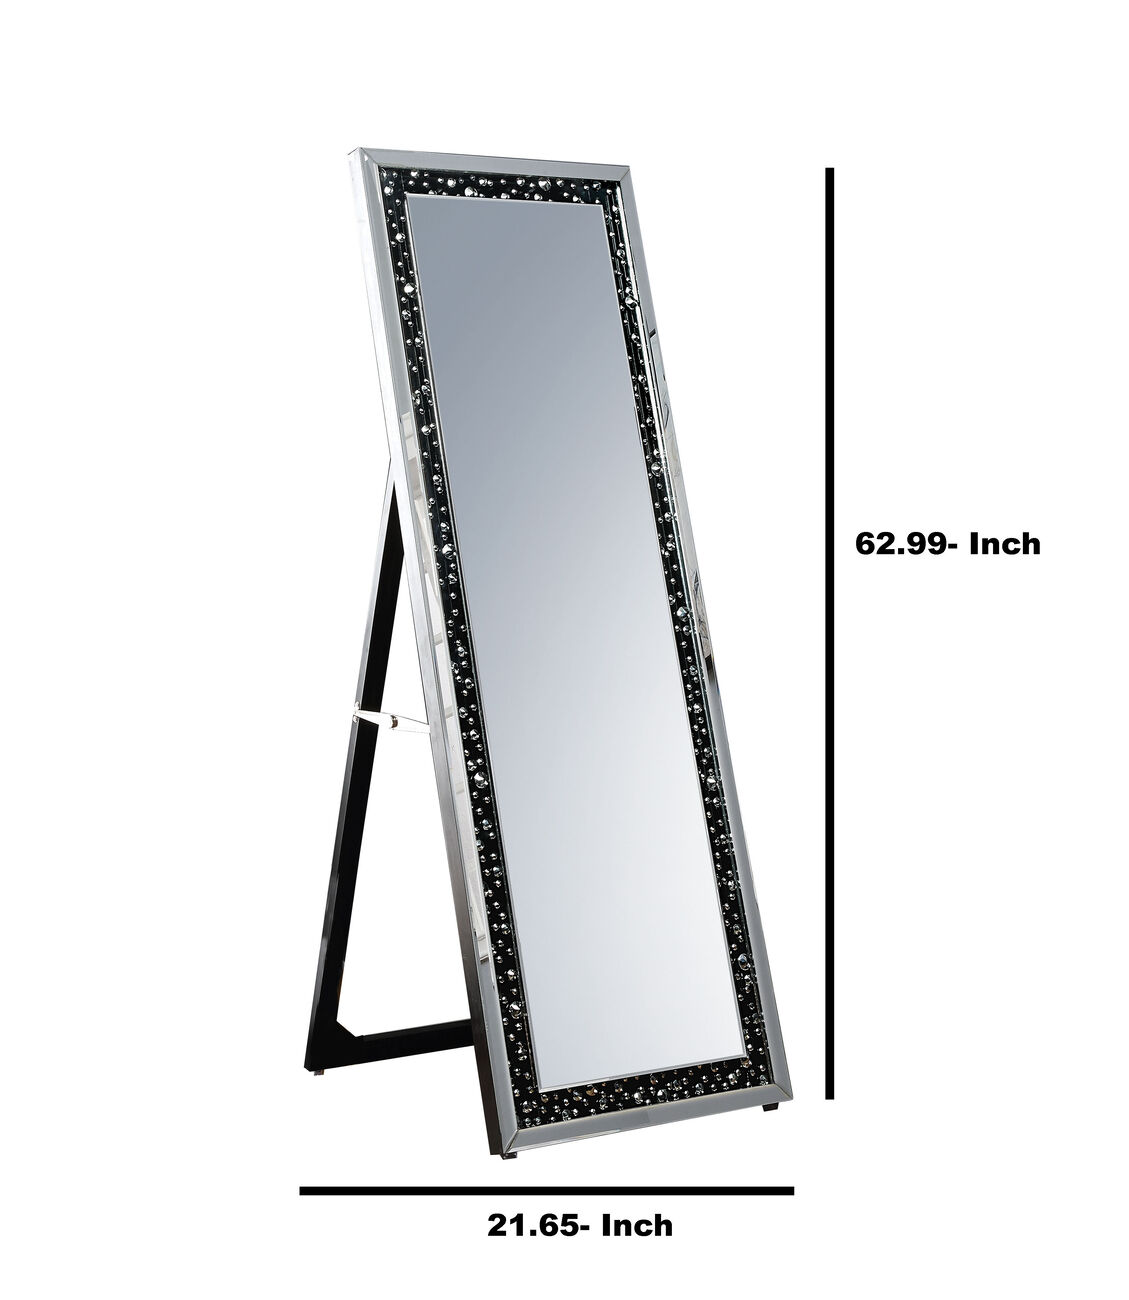 Rectangular Wooden Frame Floor Mirror with Faux Crystal Inlay, Black